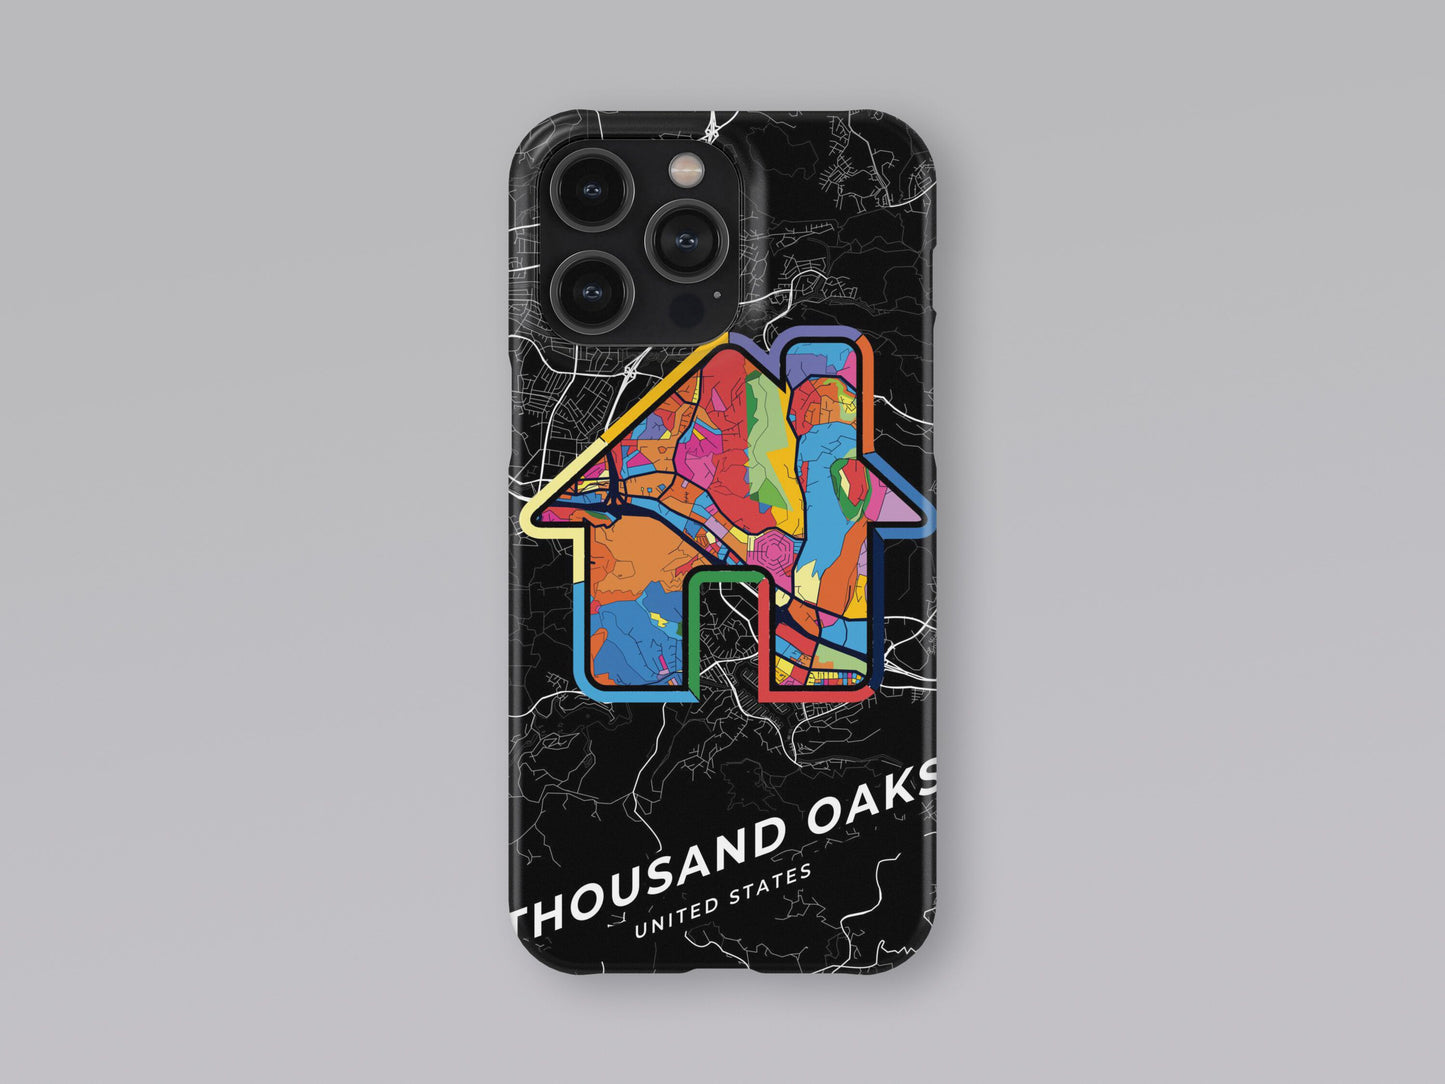 Thousand Oaks California slim phone case with colorful icon 3